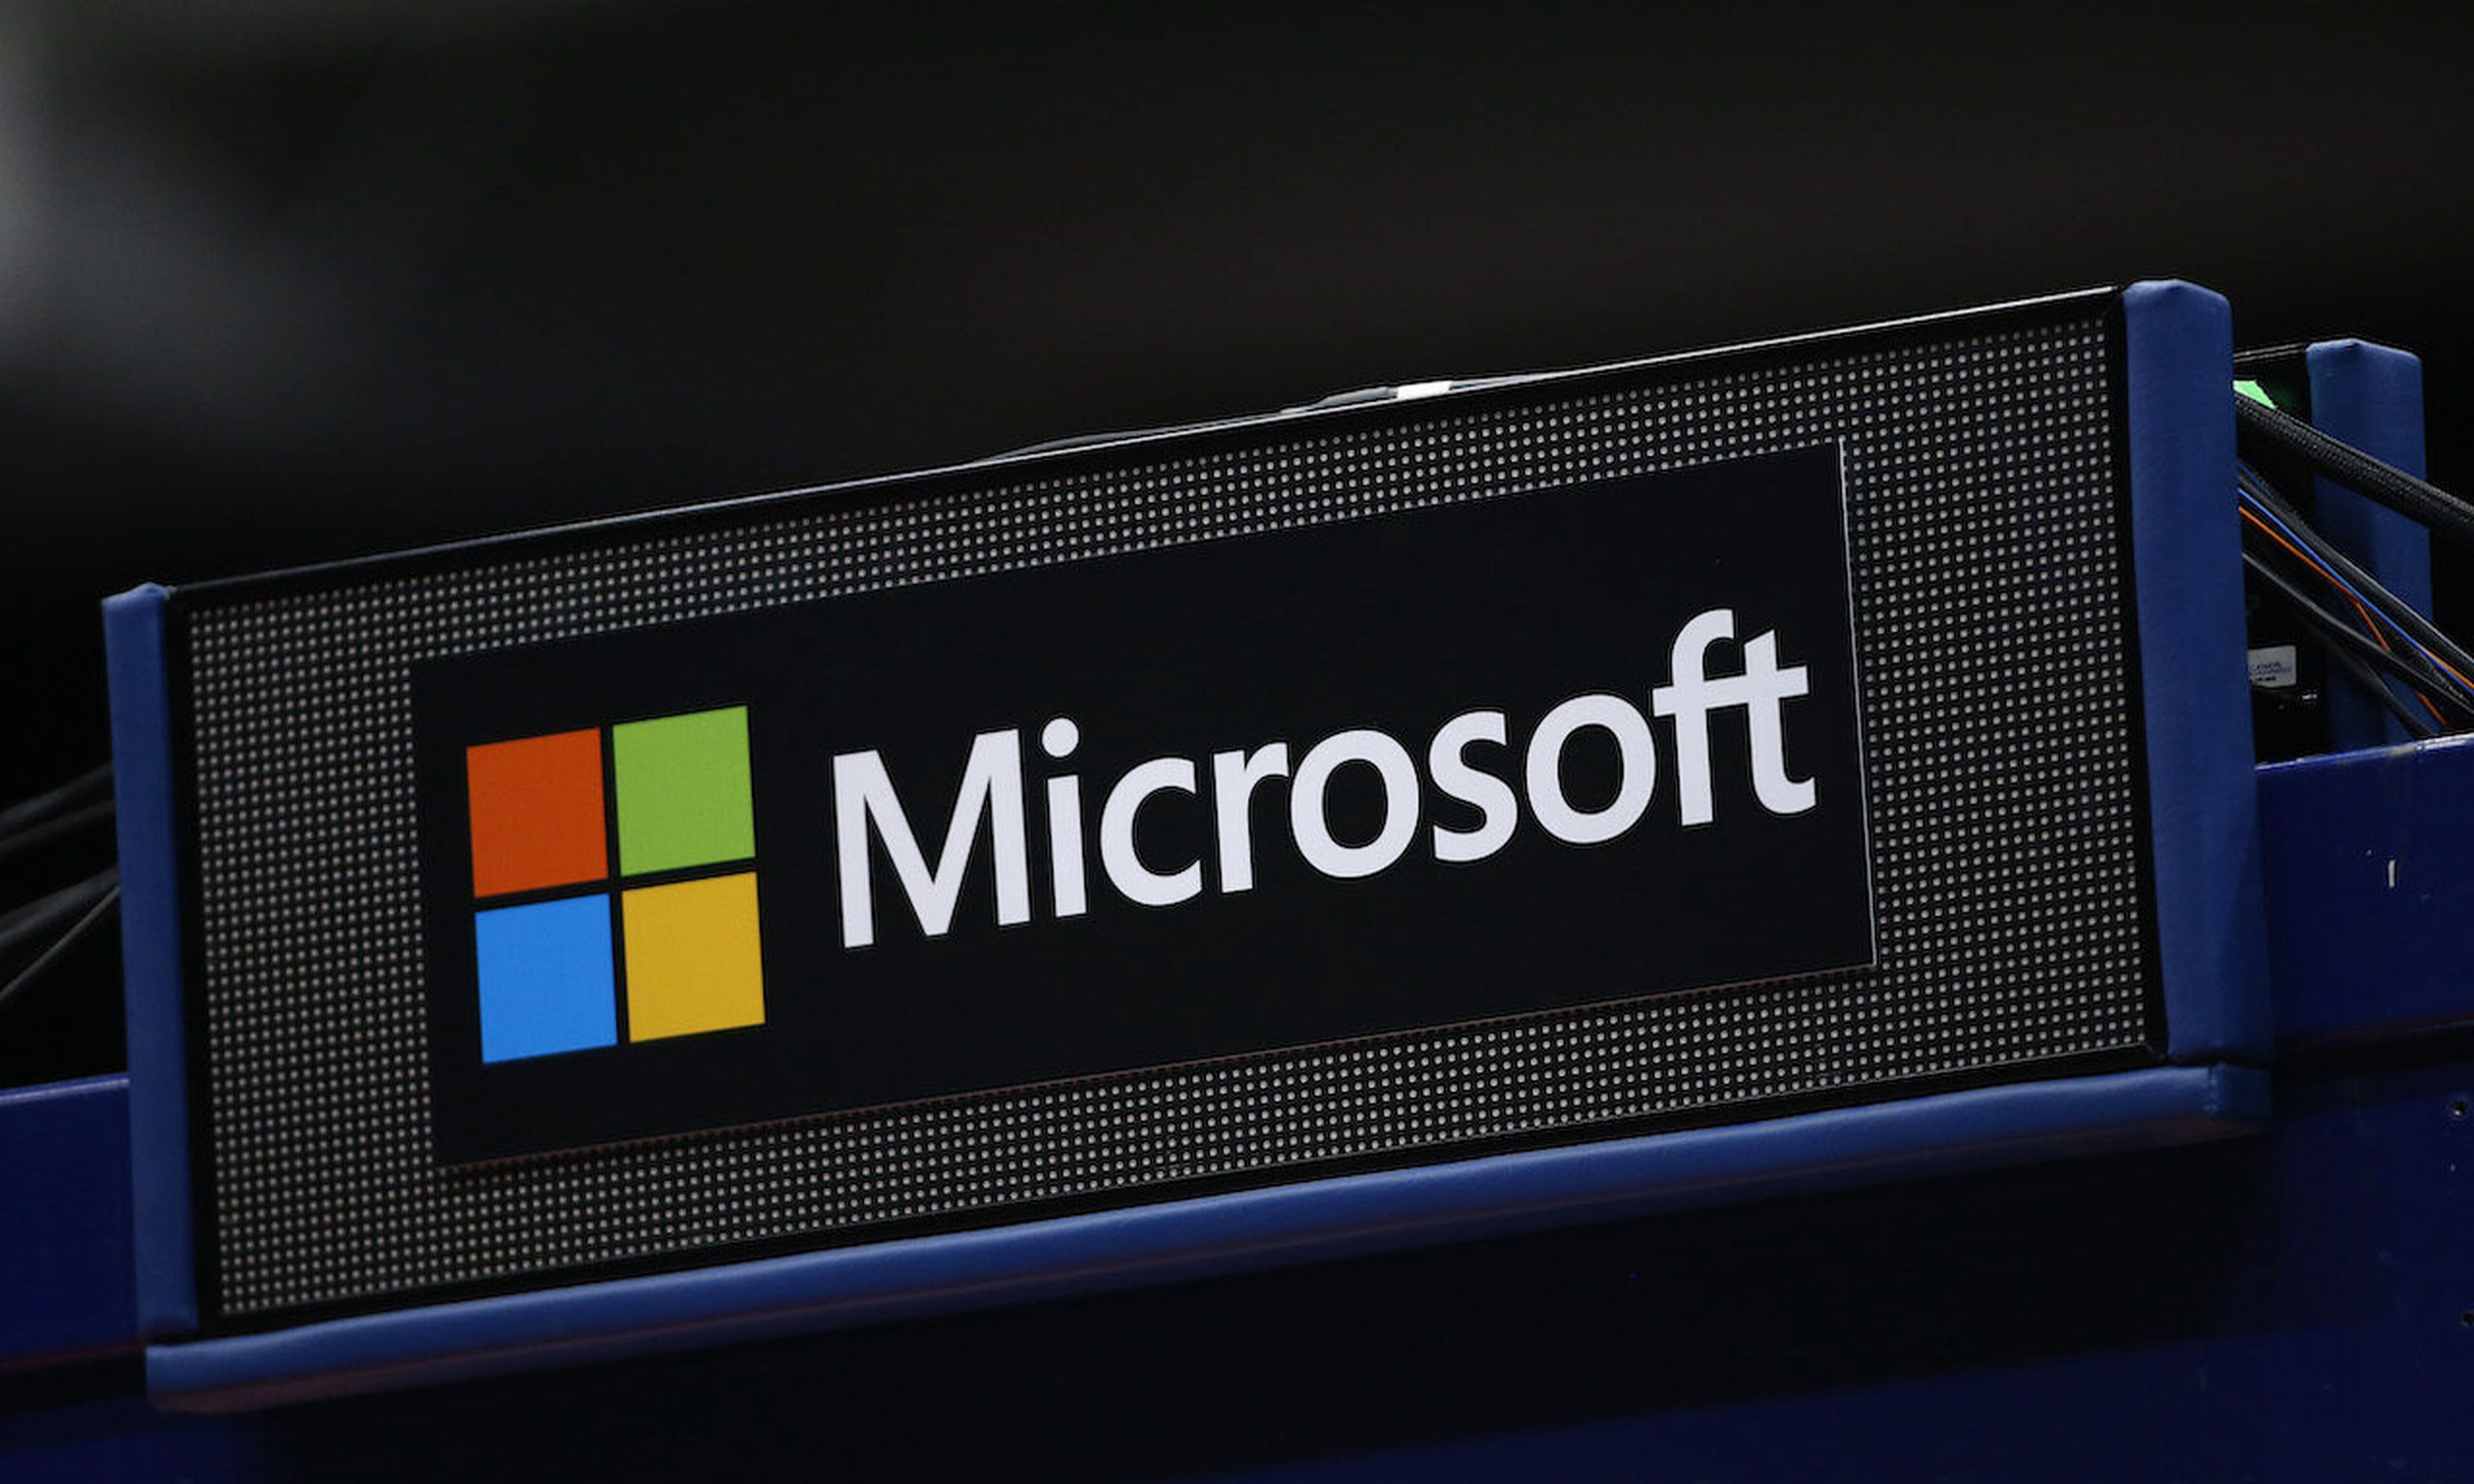 Today’s columnist, Topher Marie of Strata Identity, writes that security teams need to combine API protections with a solid identity management solution like Microsoft’s Active Directory. (Photo by Tim Heitman/Getty Images)